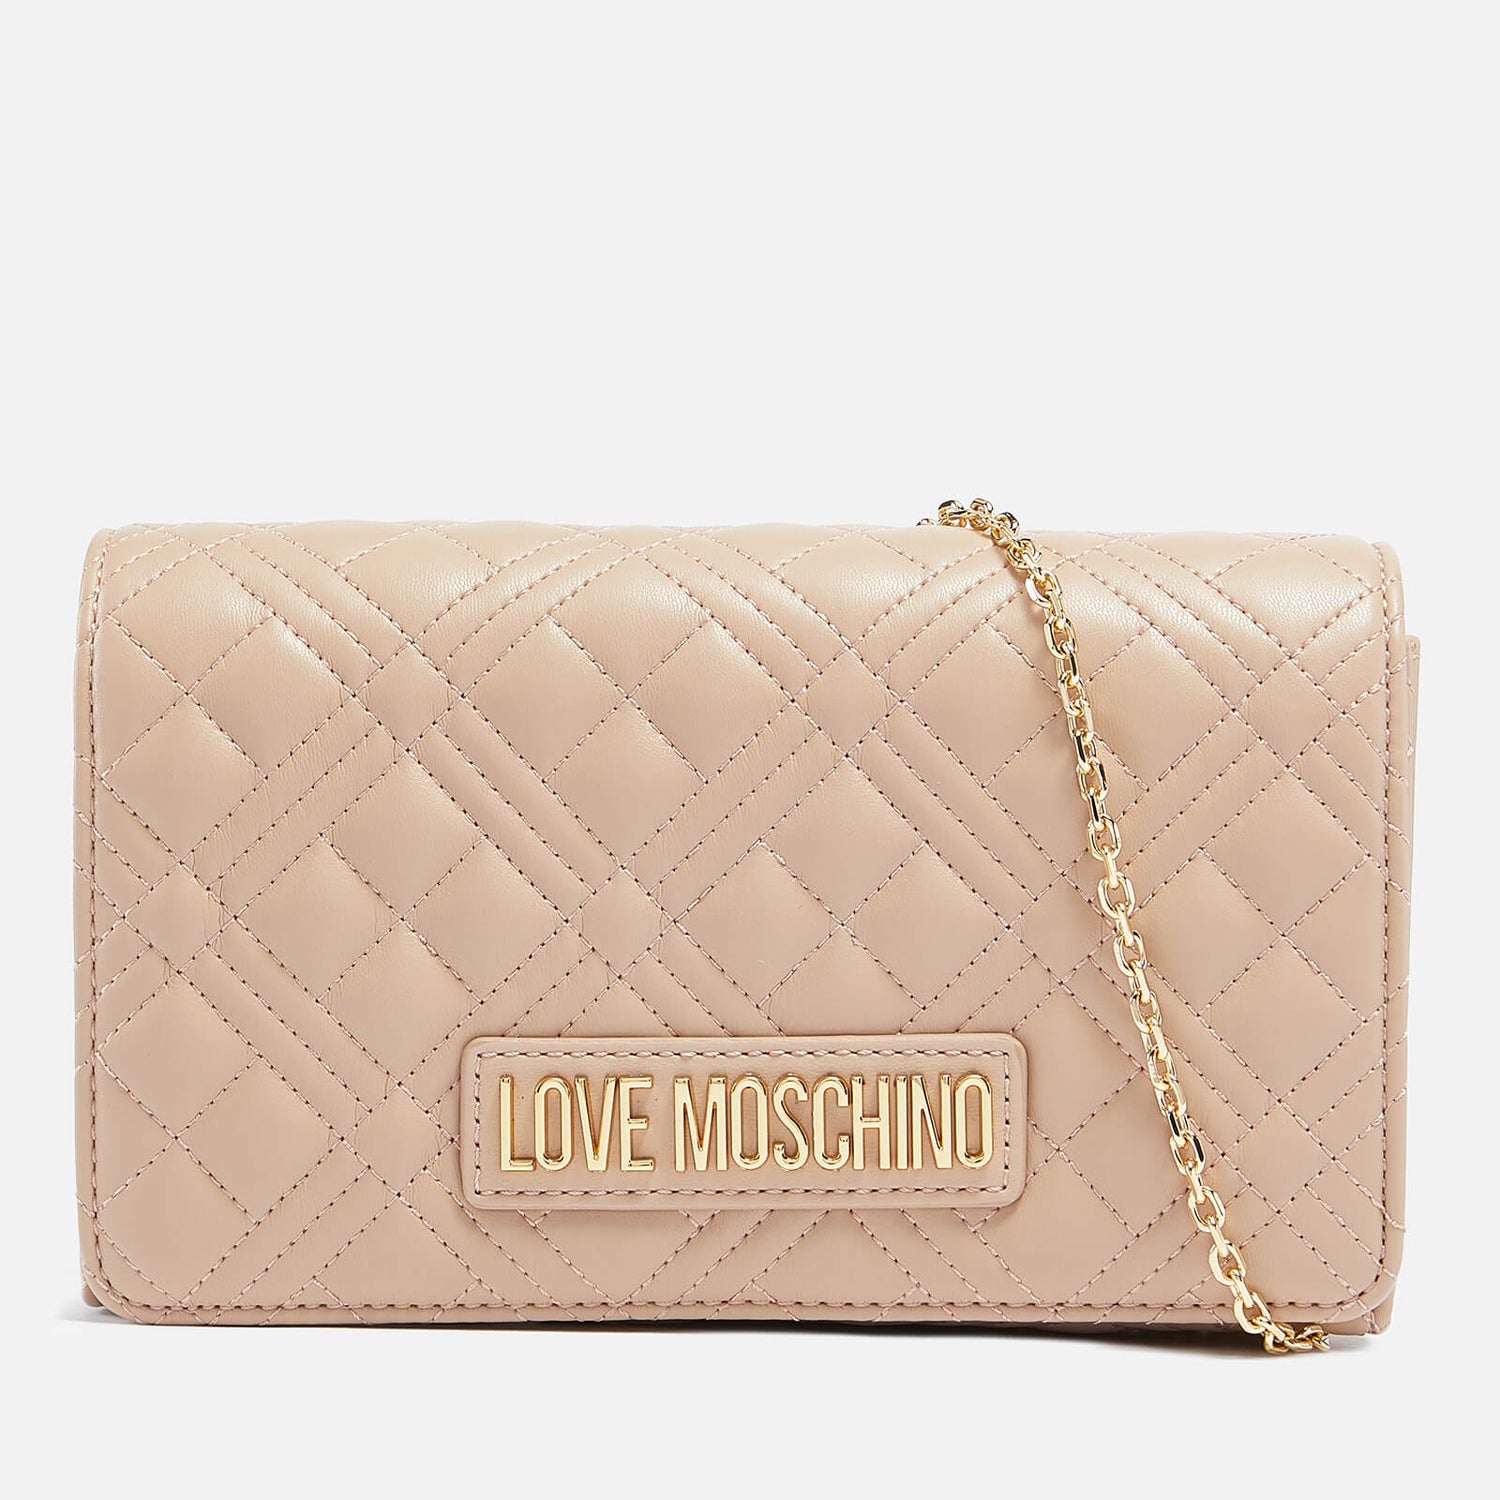 Love Moschino Women's Quilted Chain Cross Body Bag - Beige Natural